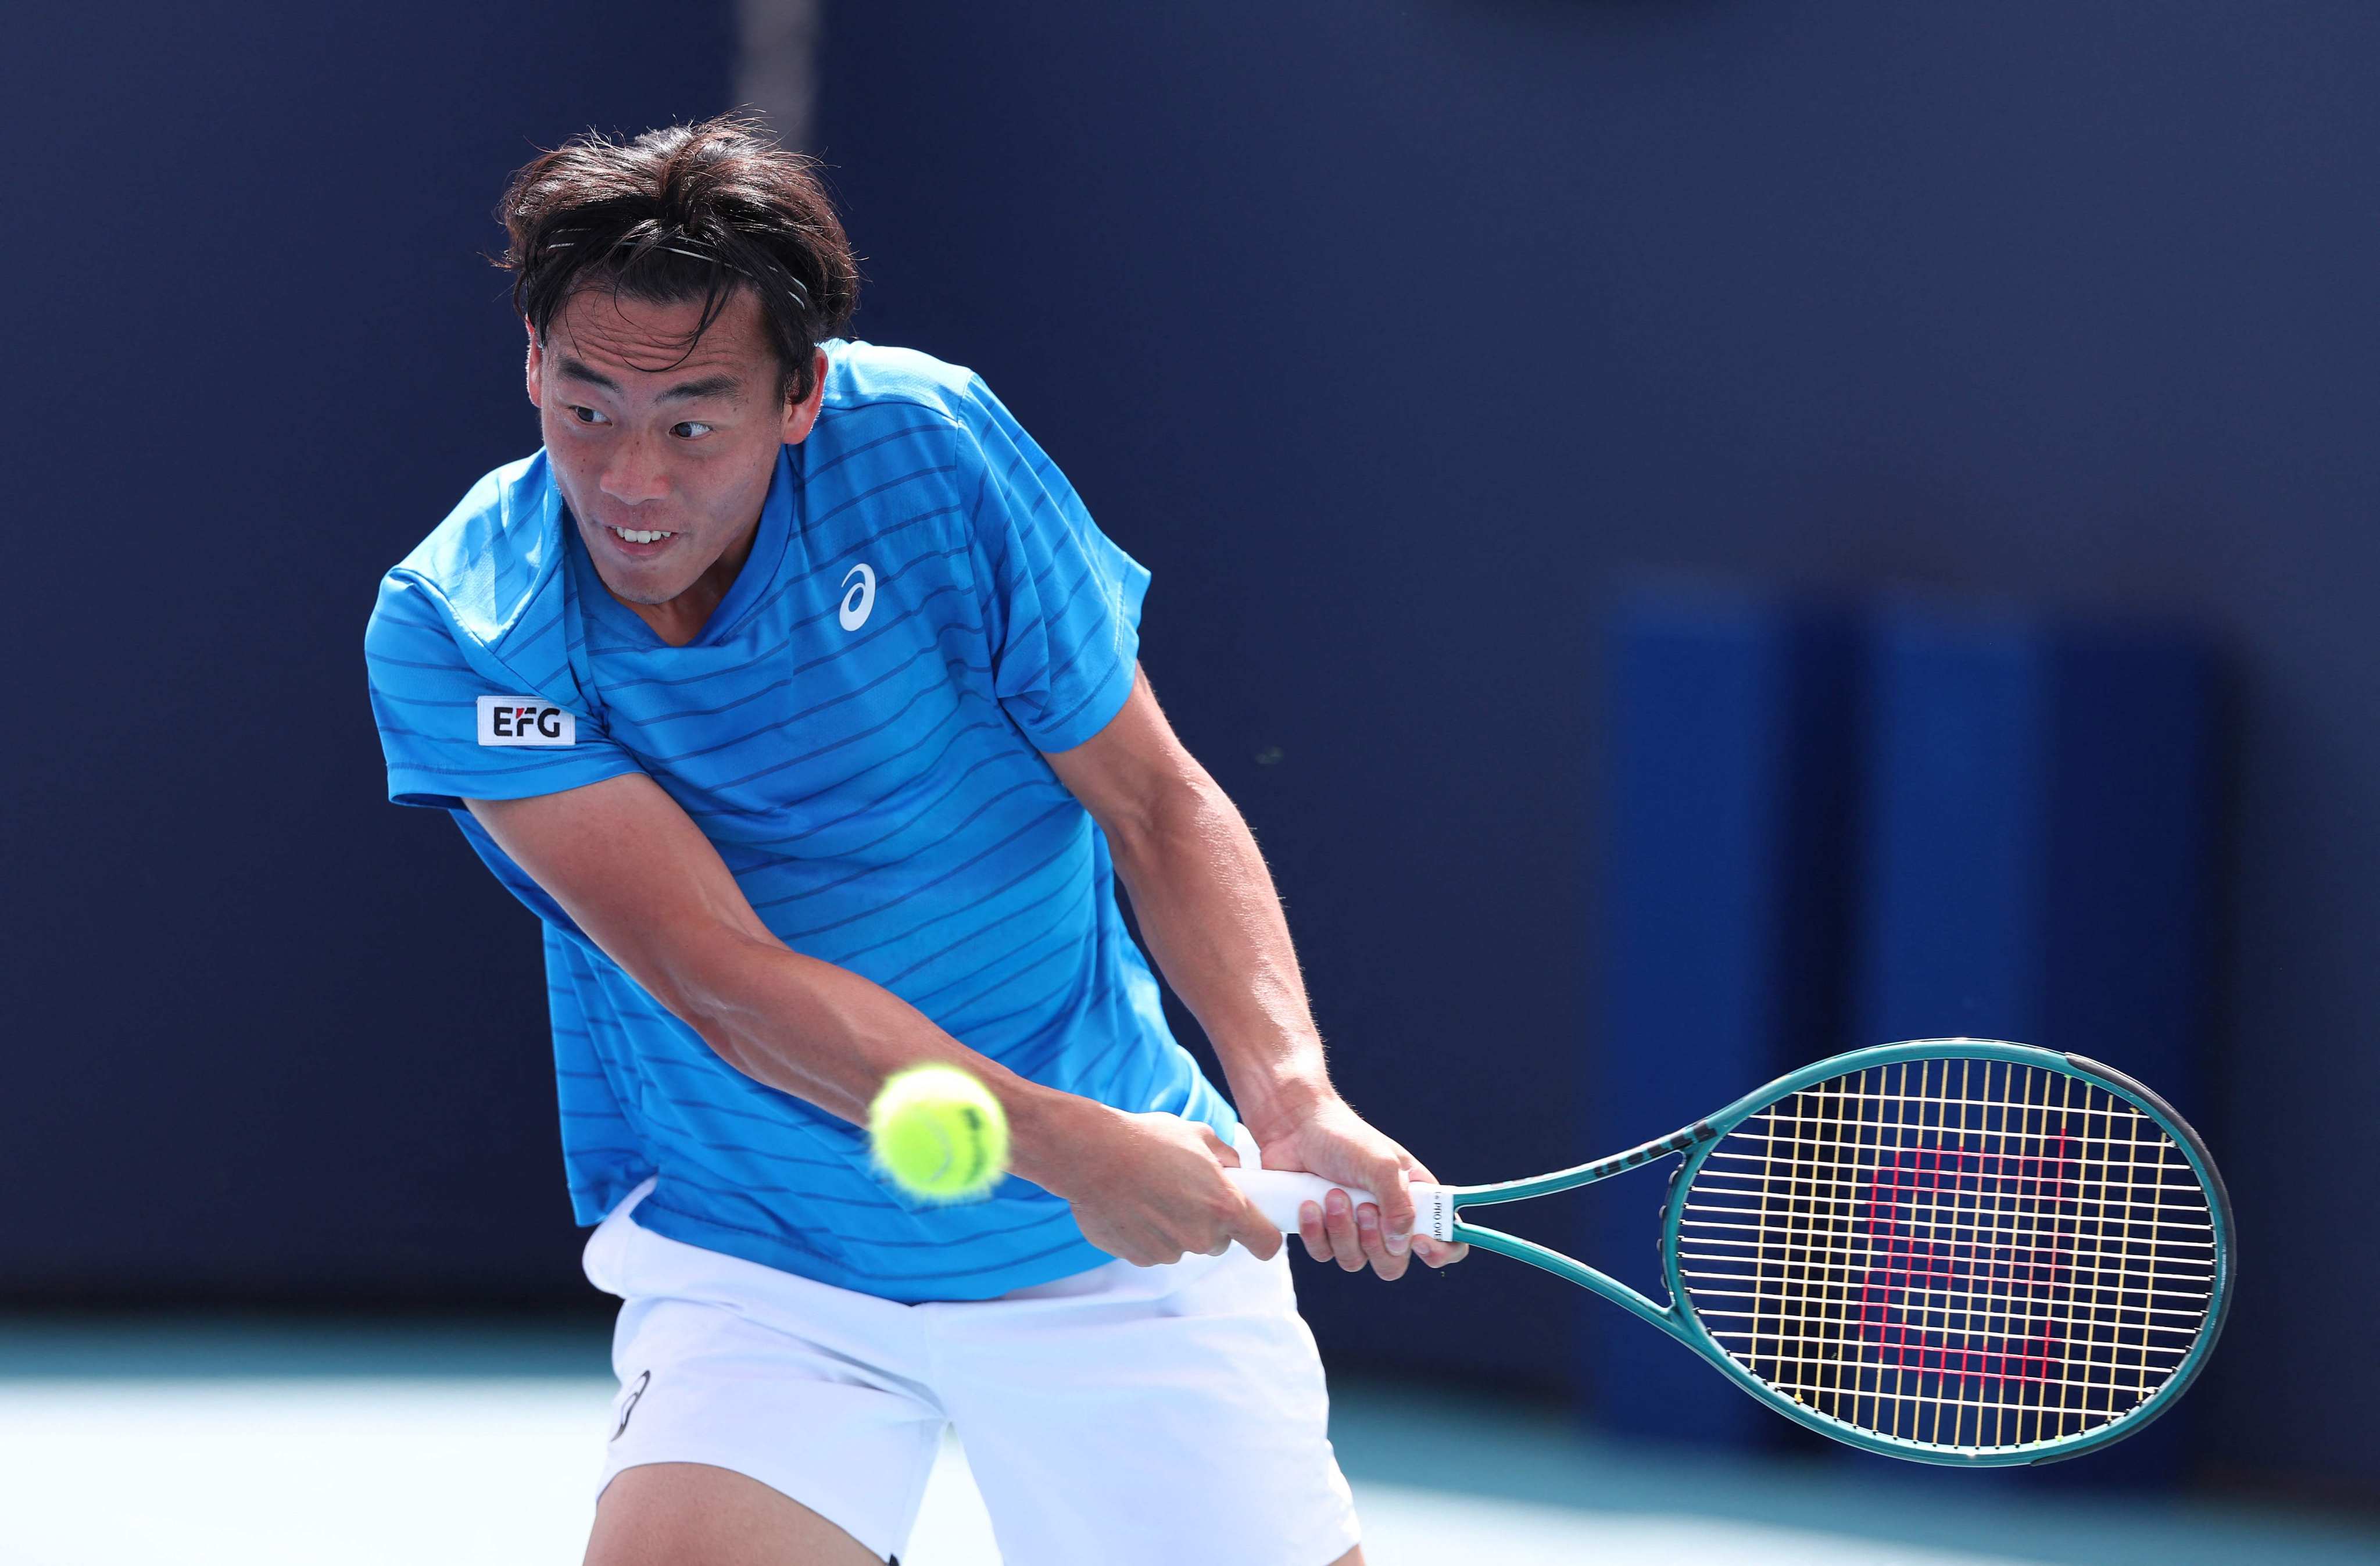 Coleman Wong returns a shot against Laslo Djere during their first round match at the Miami Open. Photo: Getty Images